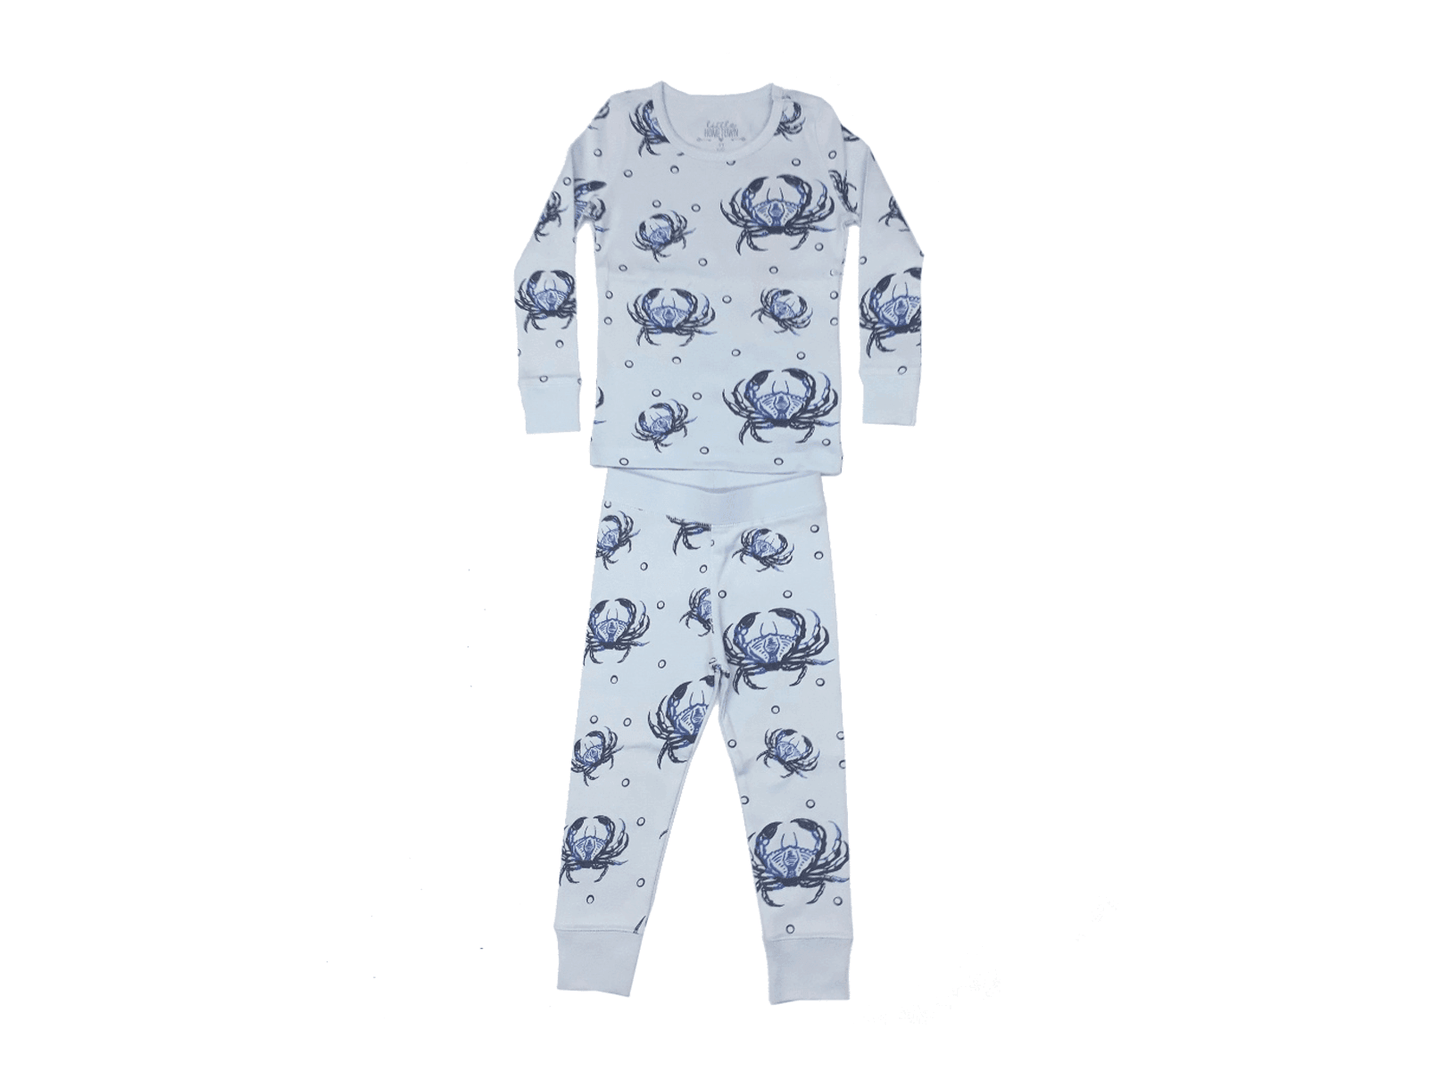 Toddler pajamas with playful blue crab pattern on a white background, featuring a cozy and soft fabric.